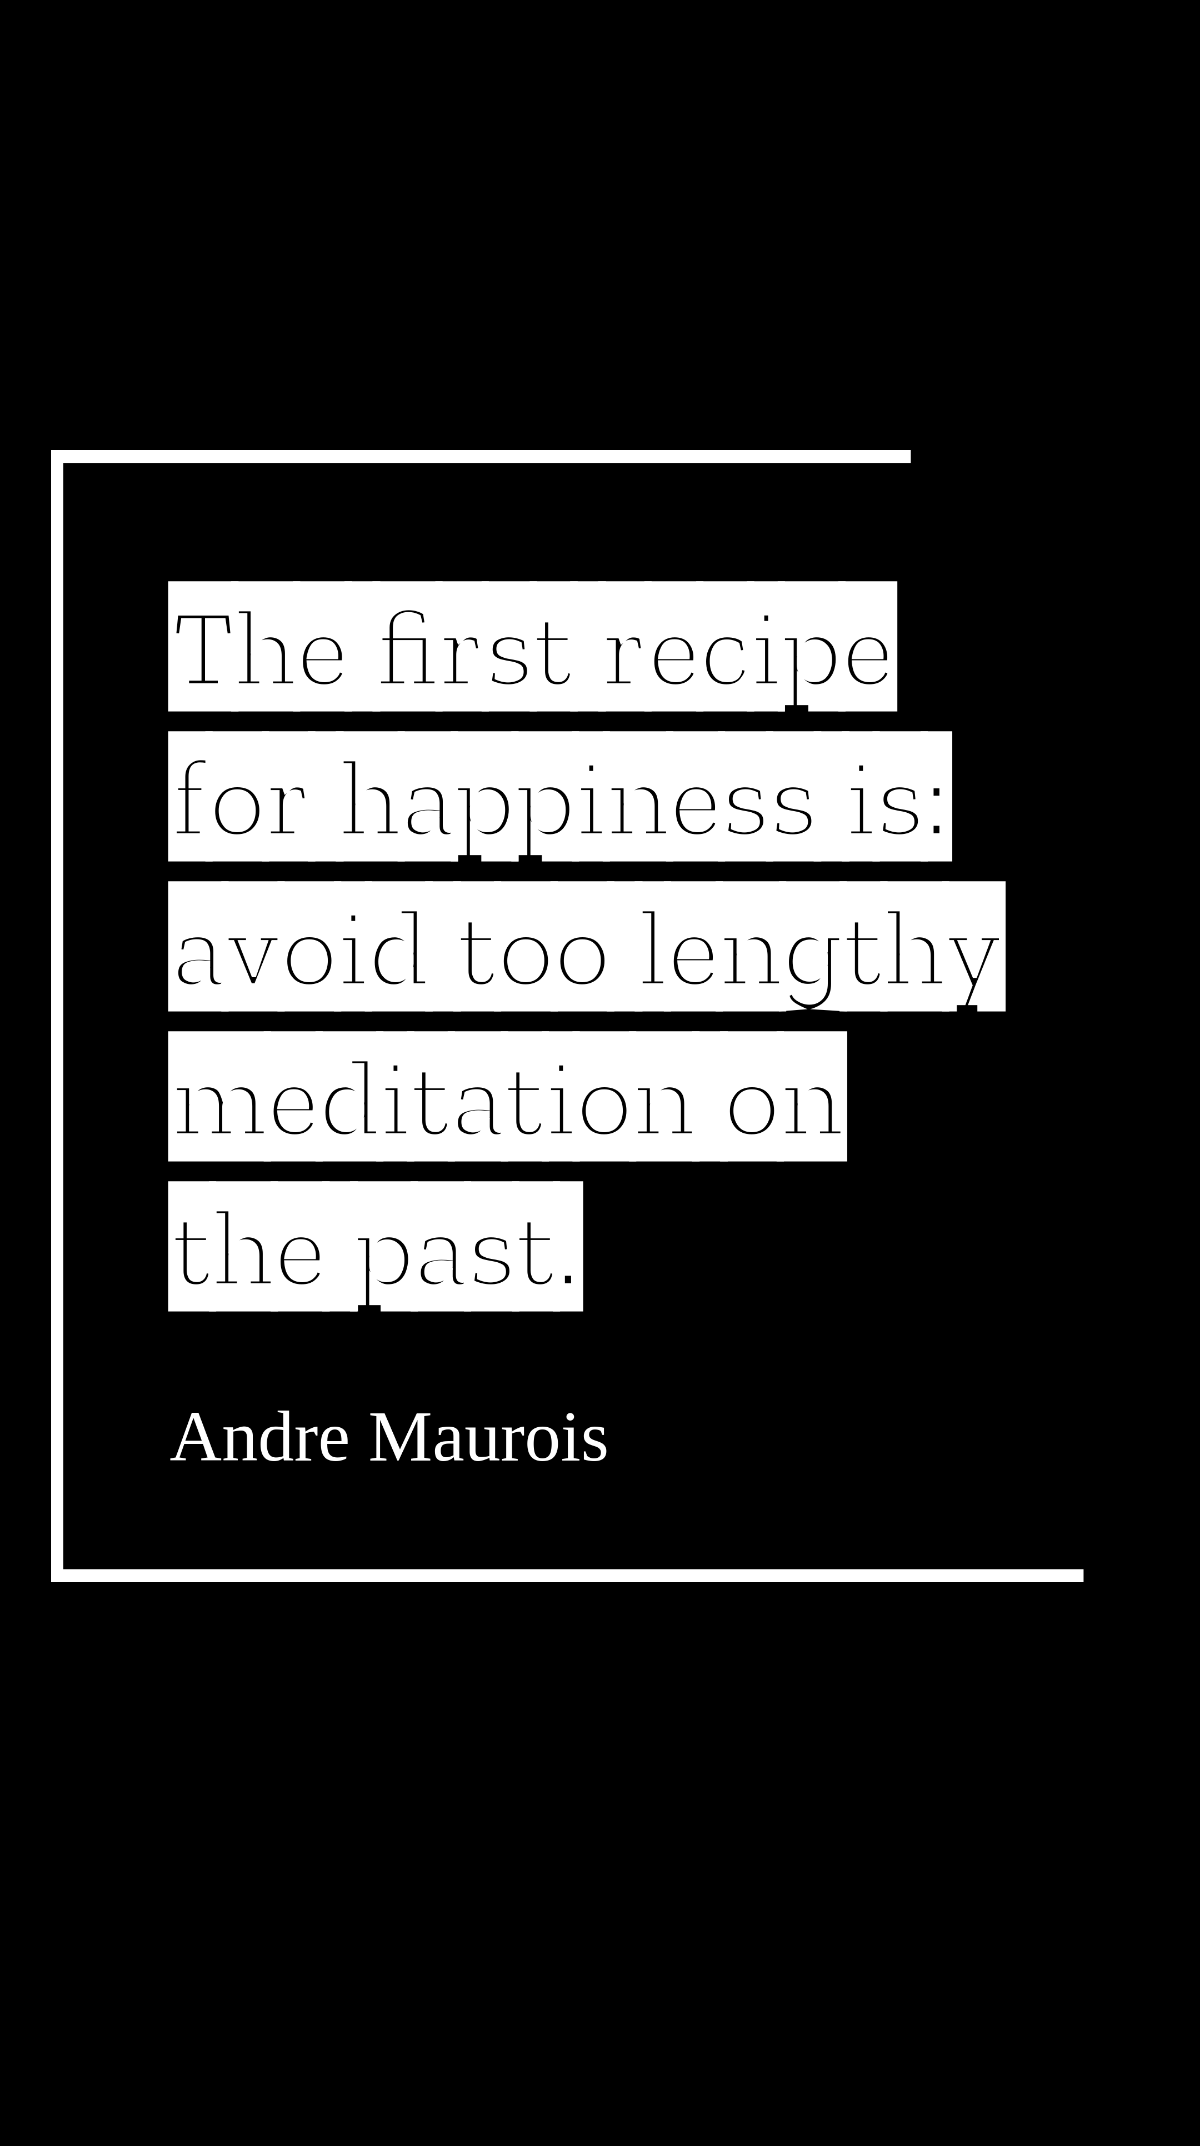 Andre Maurois - The first recipe for happiness is: avoid too lengthy meditation on the past. Template